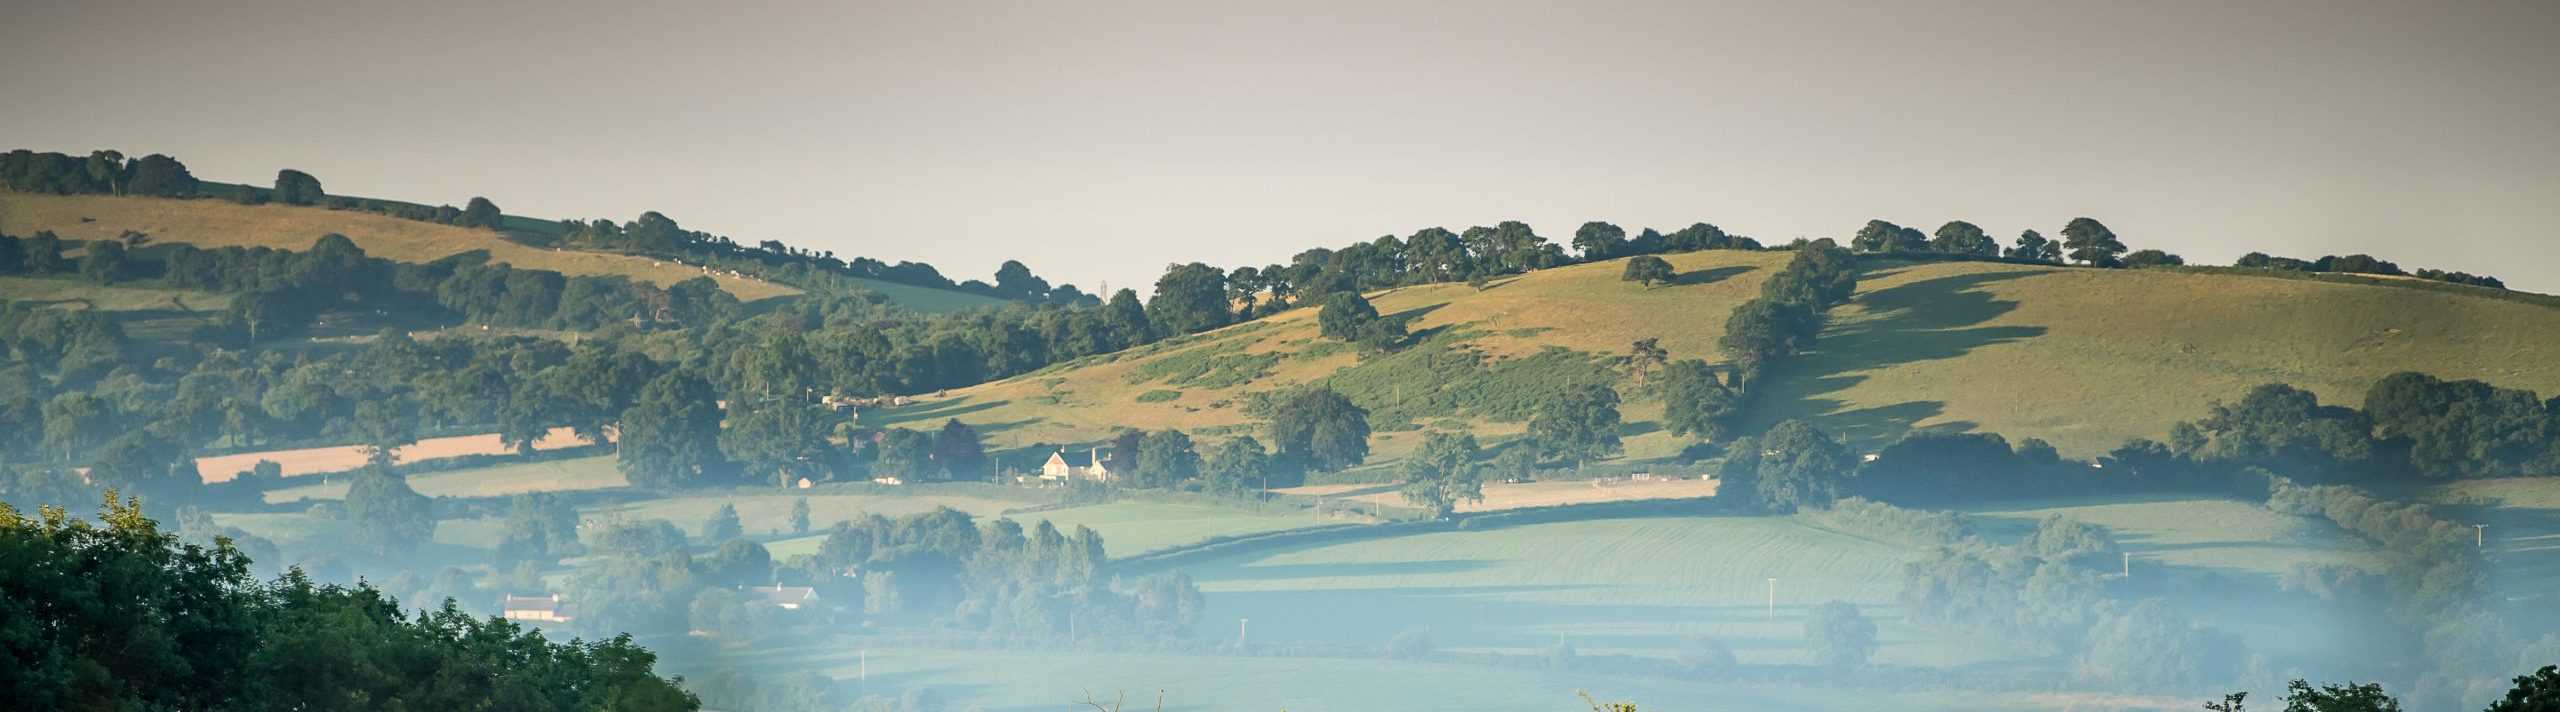 The Coombe Farm valley